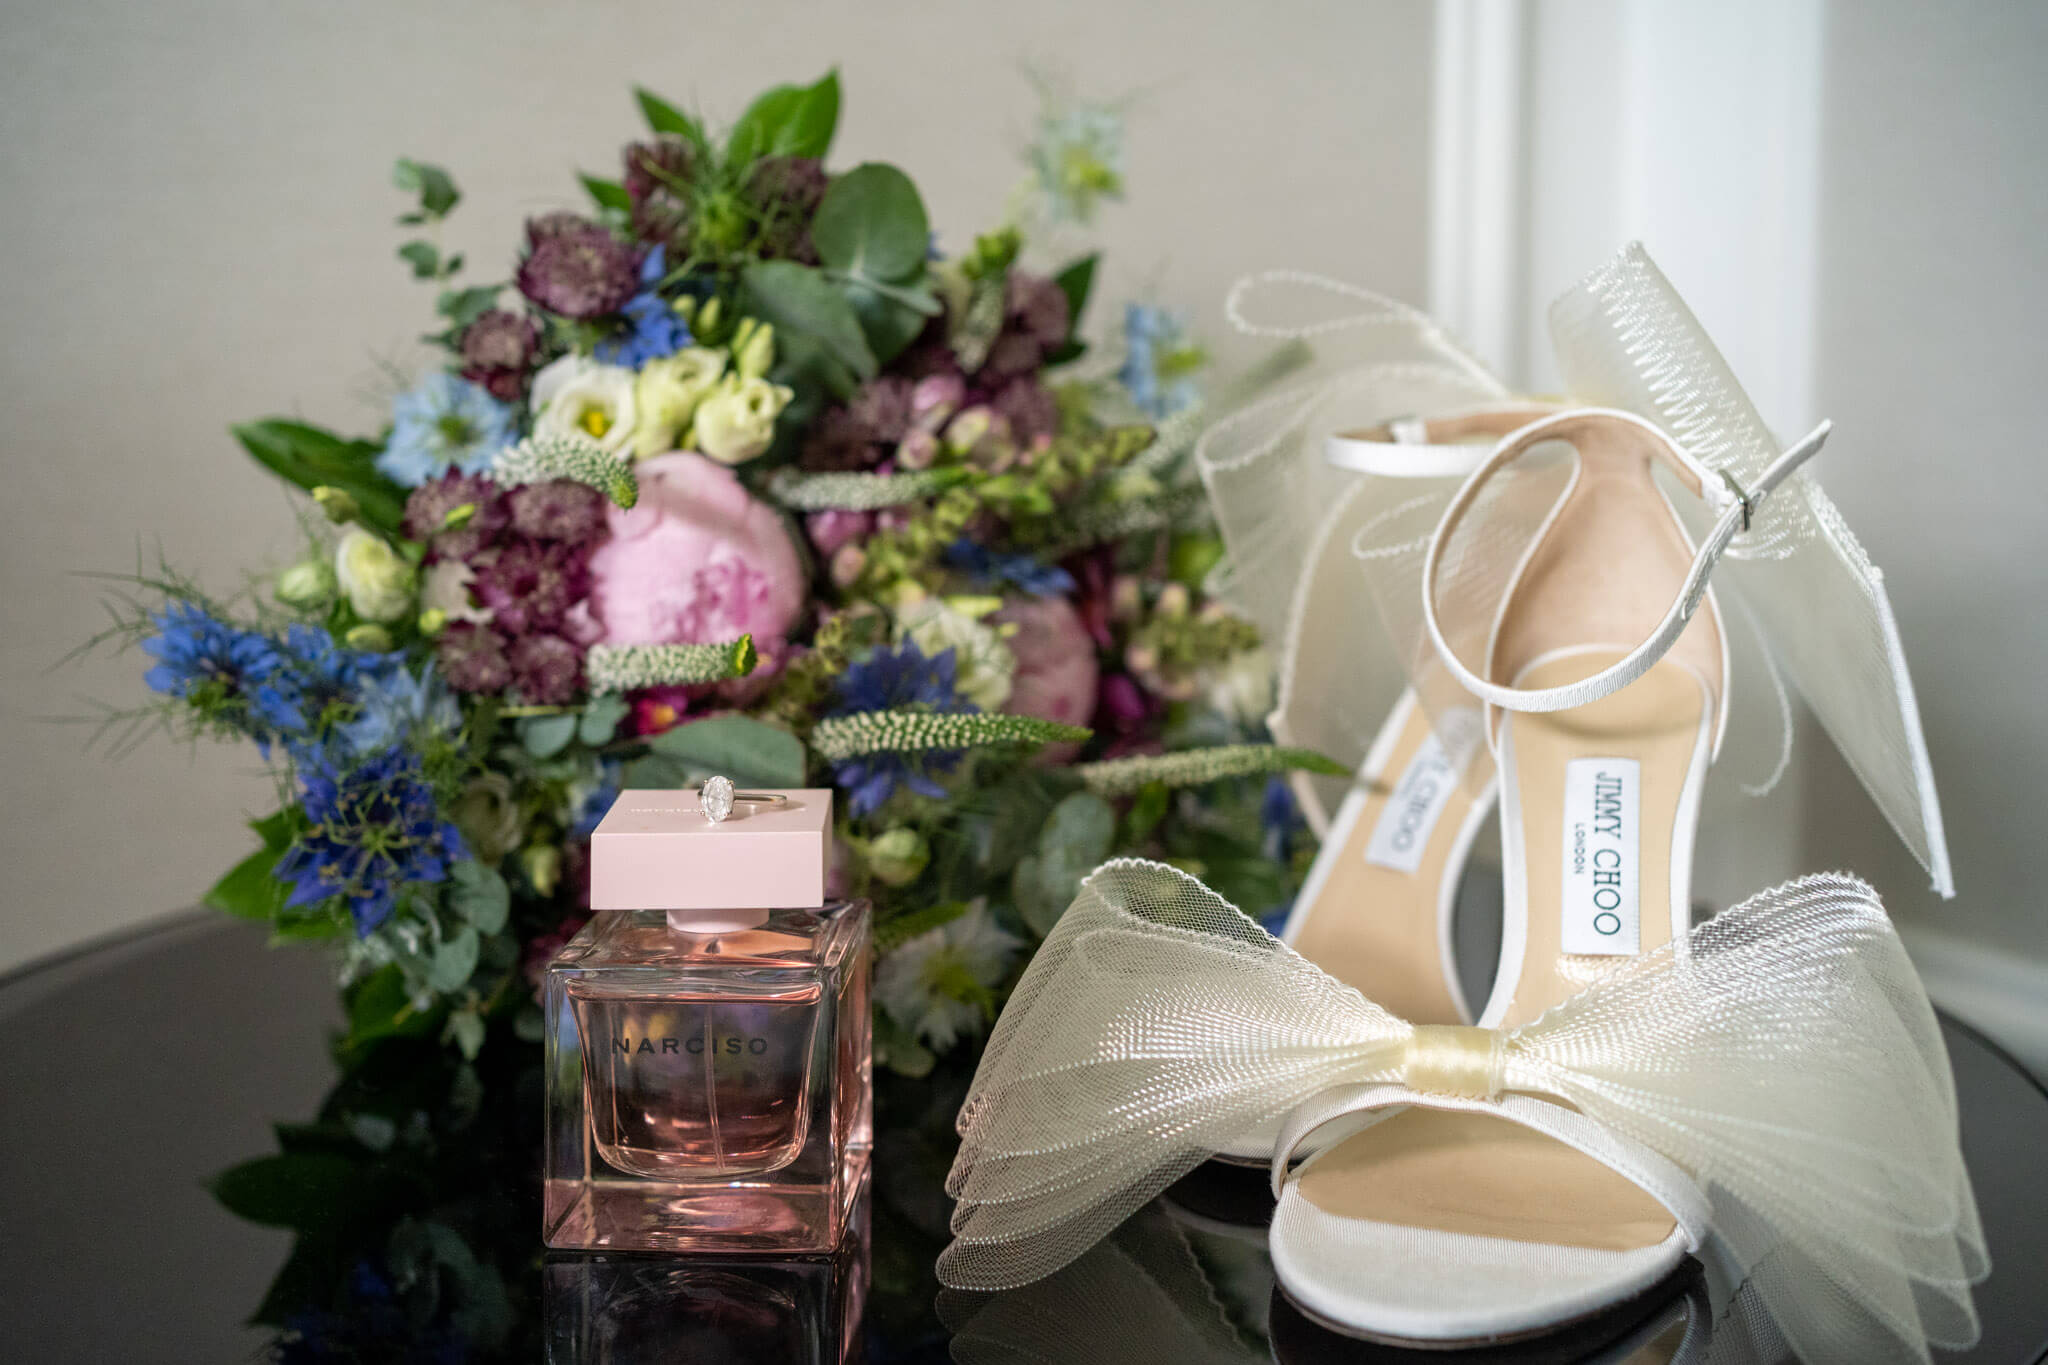 Bride's Jimmy Choo stilettos with huge bows next to her Narciso perfume, engagment ring and bouquet